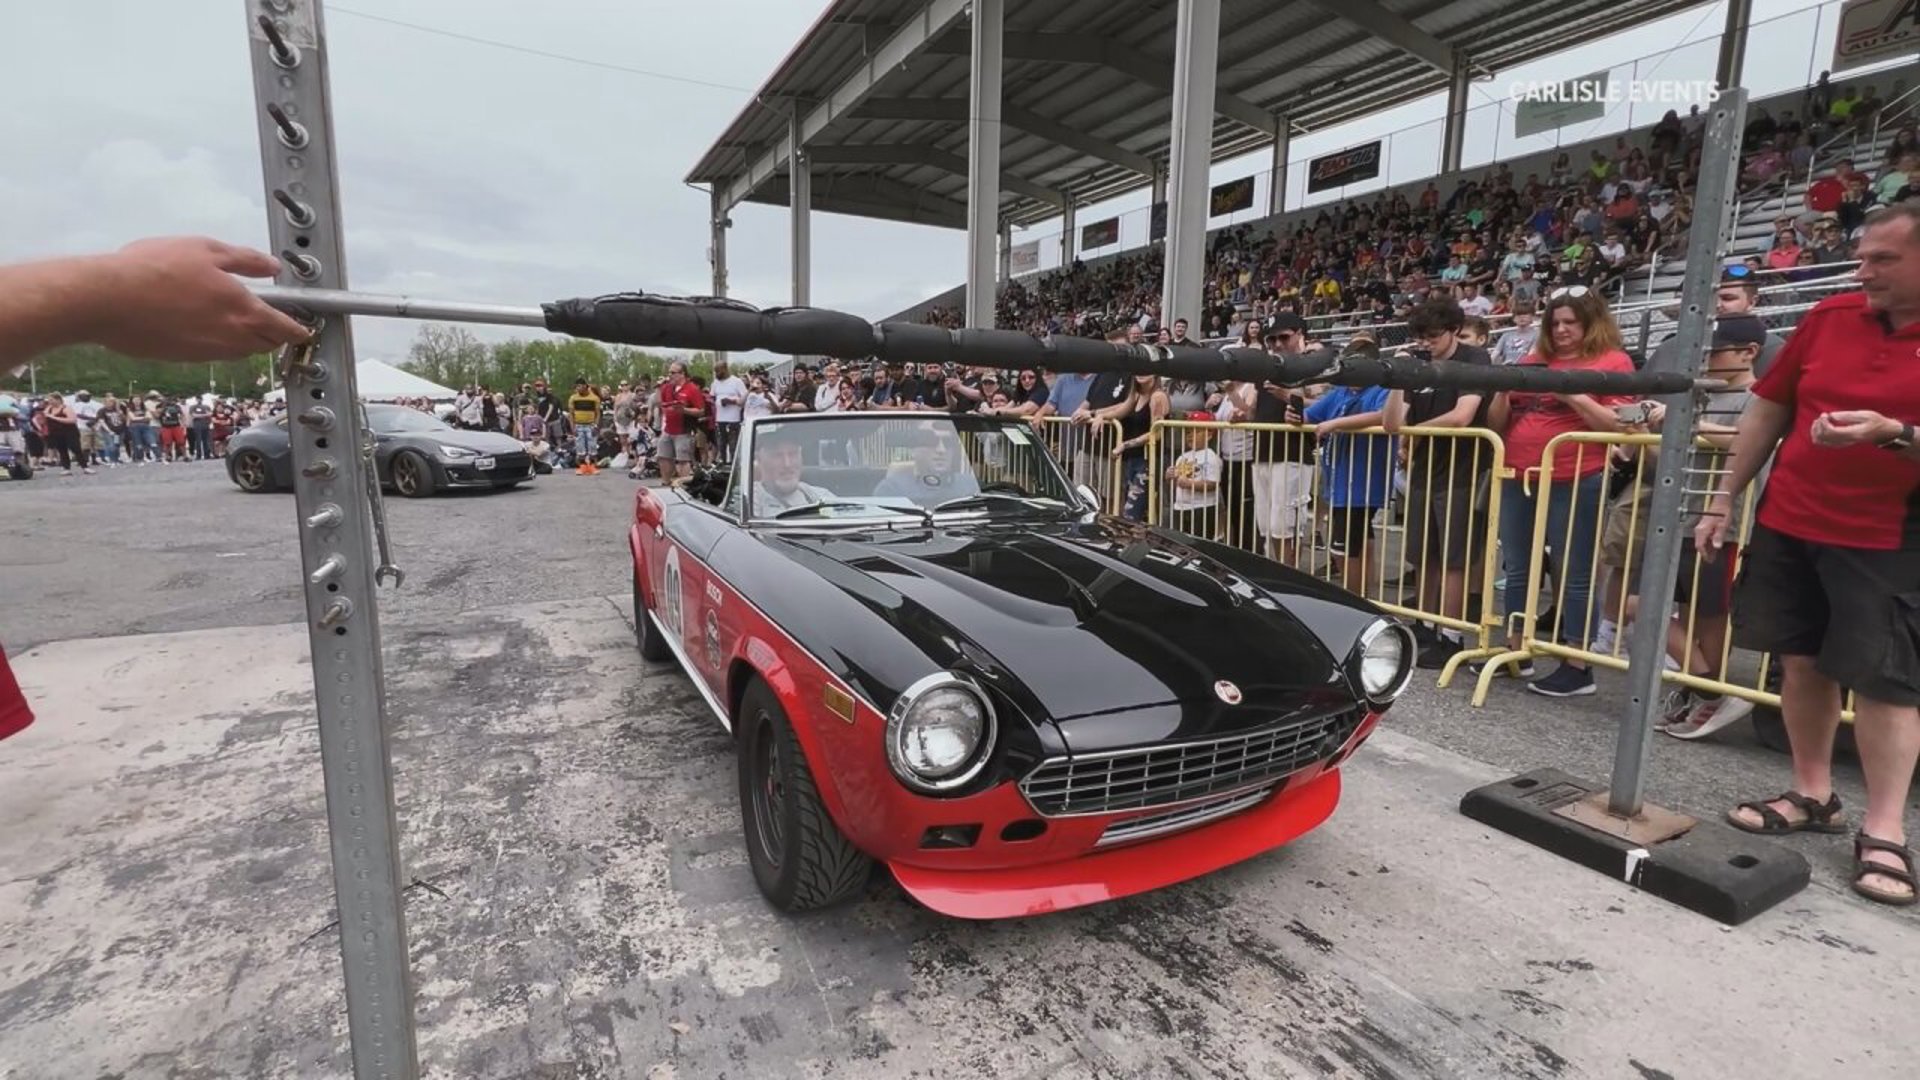 The Carlisle Import & Performance Nationals brings cars from several countries around the world for an international automotive experience like no other.